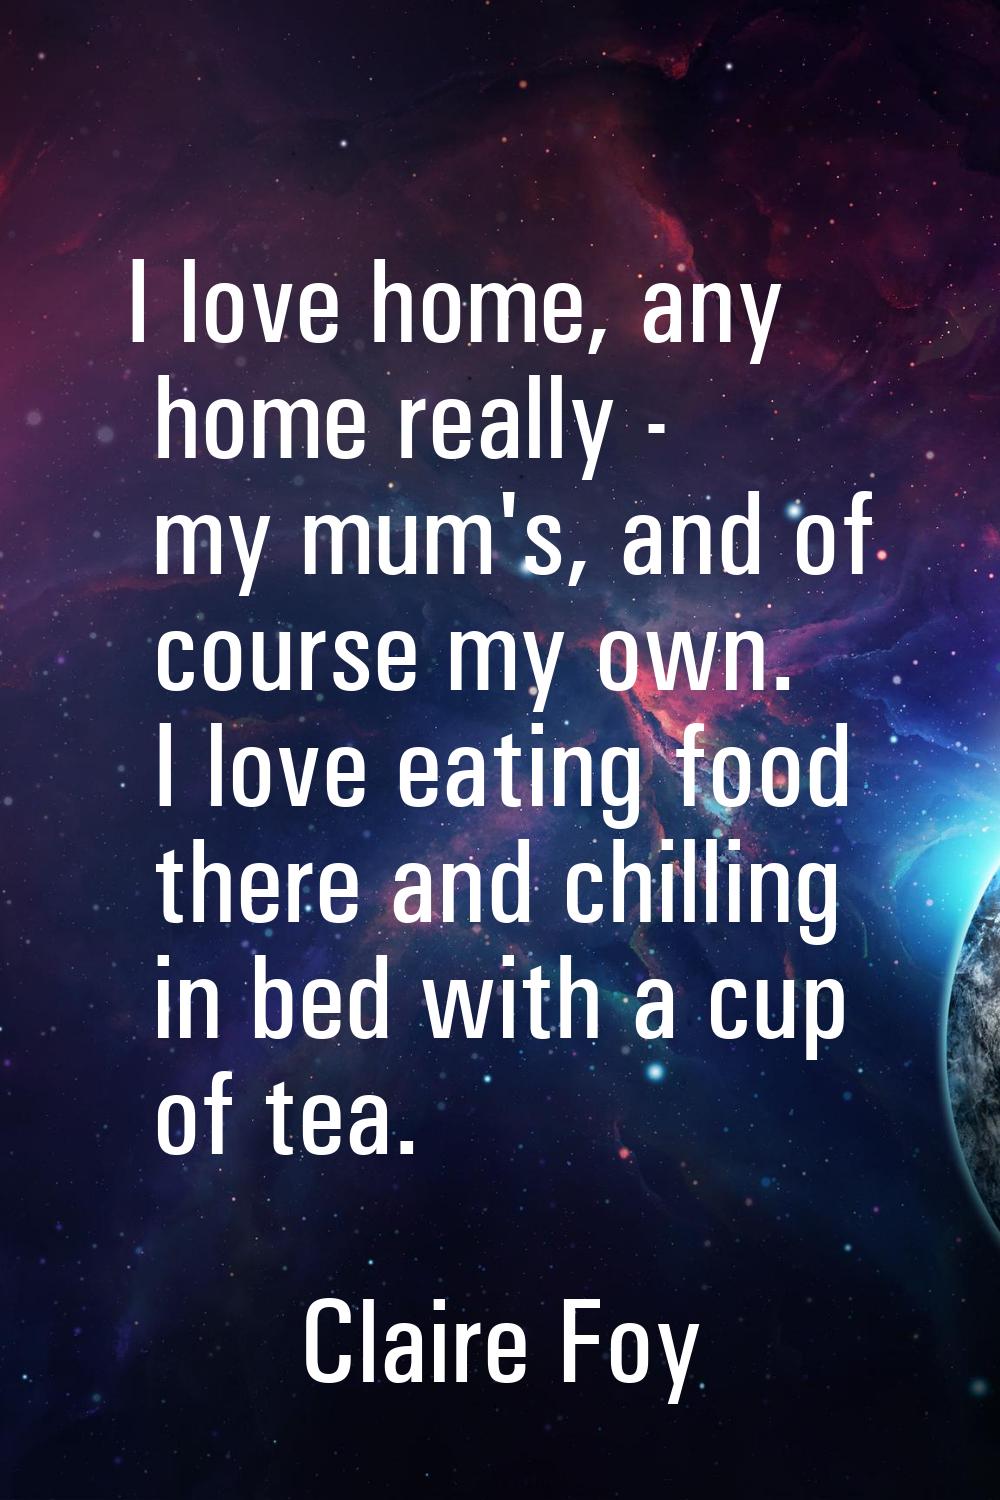 I love home, any home really - my mum's, and of course my own. I love eating food there and chillin